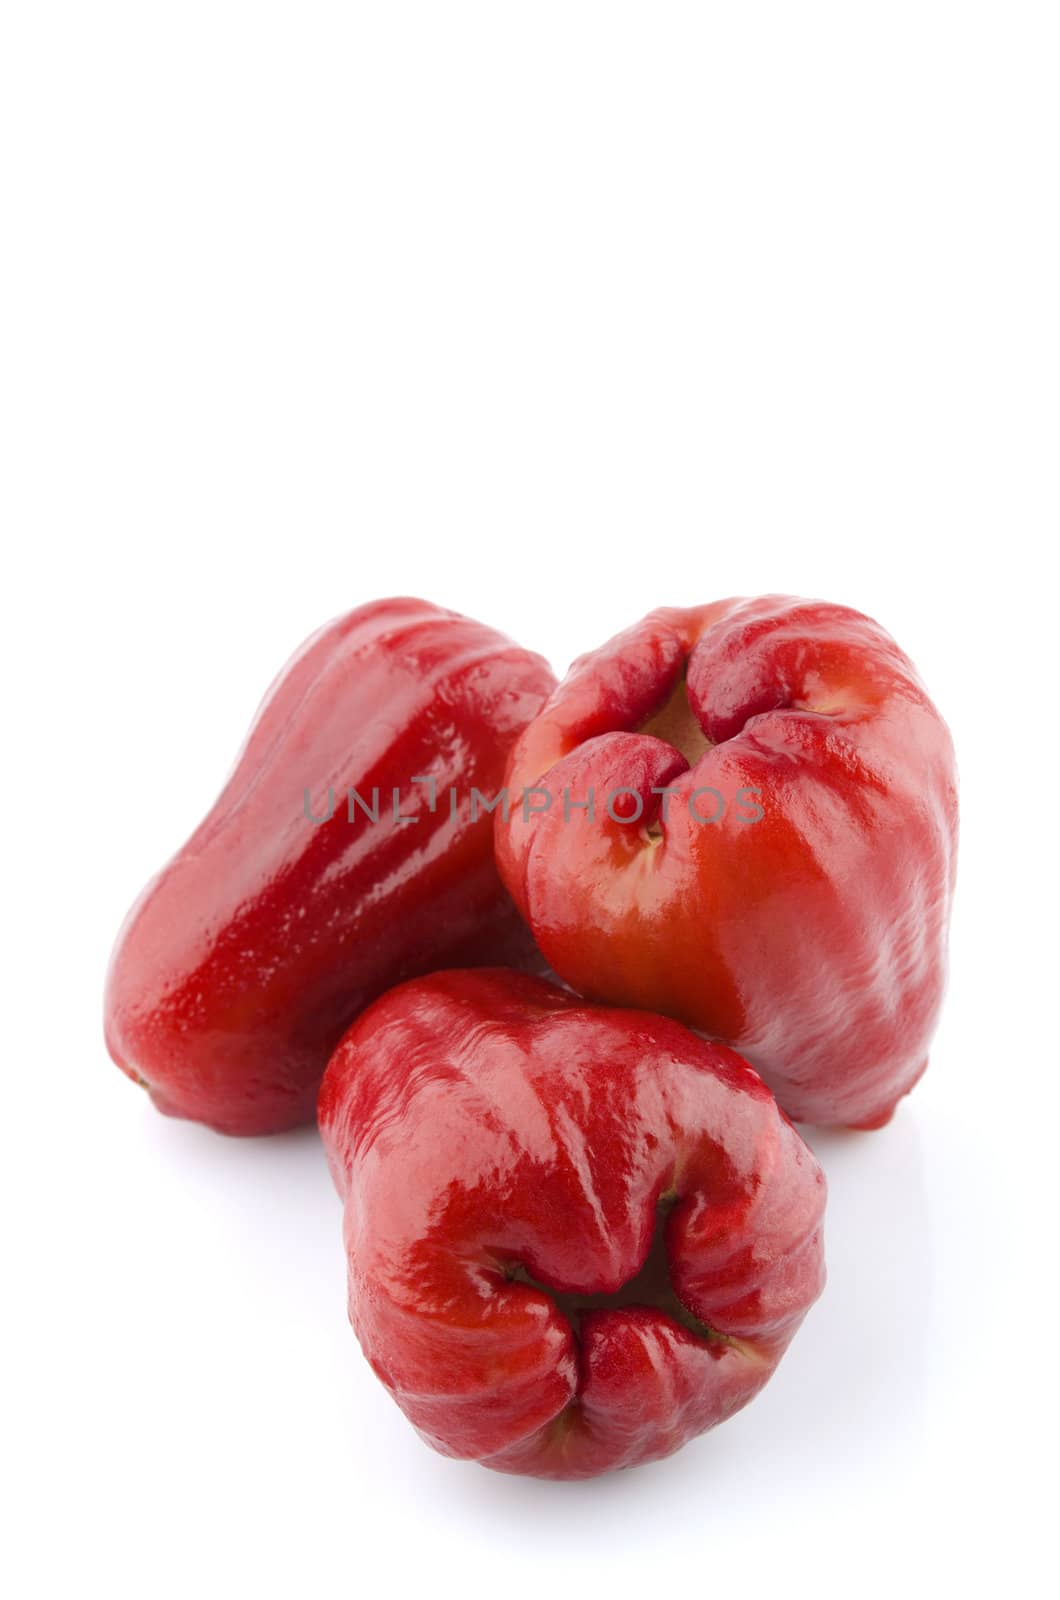 Thai Fruit the Rose apples or chomphu on white background